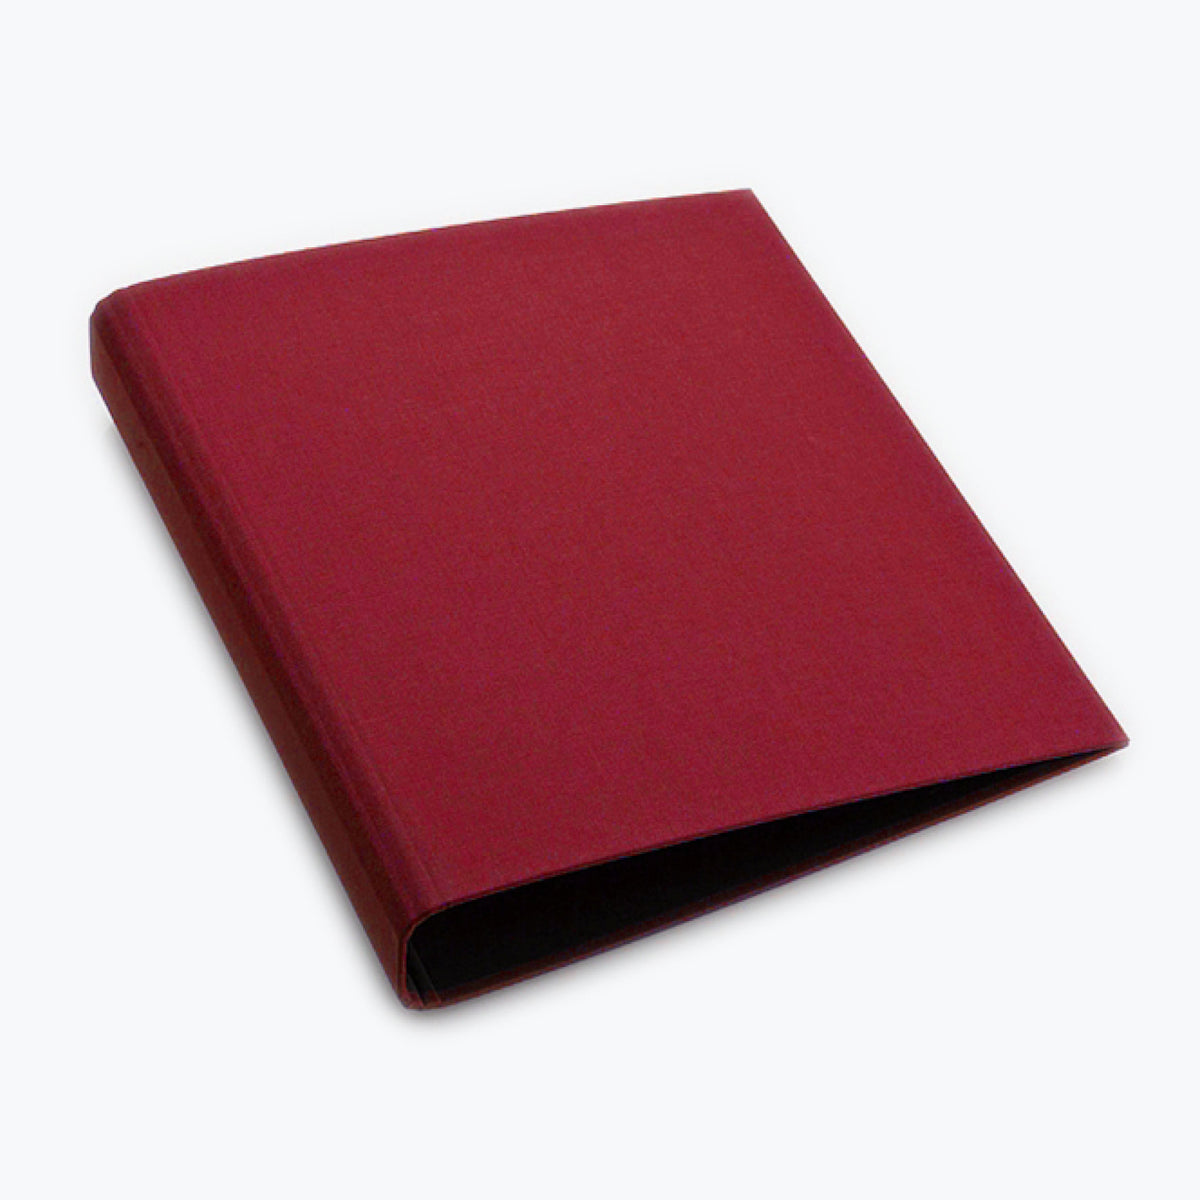 Bookbinders Design - Cloth Ringbinder - A3 - Maroon <Outgoing>